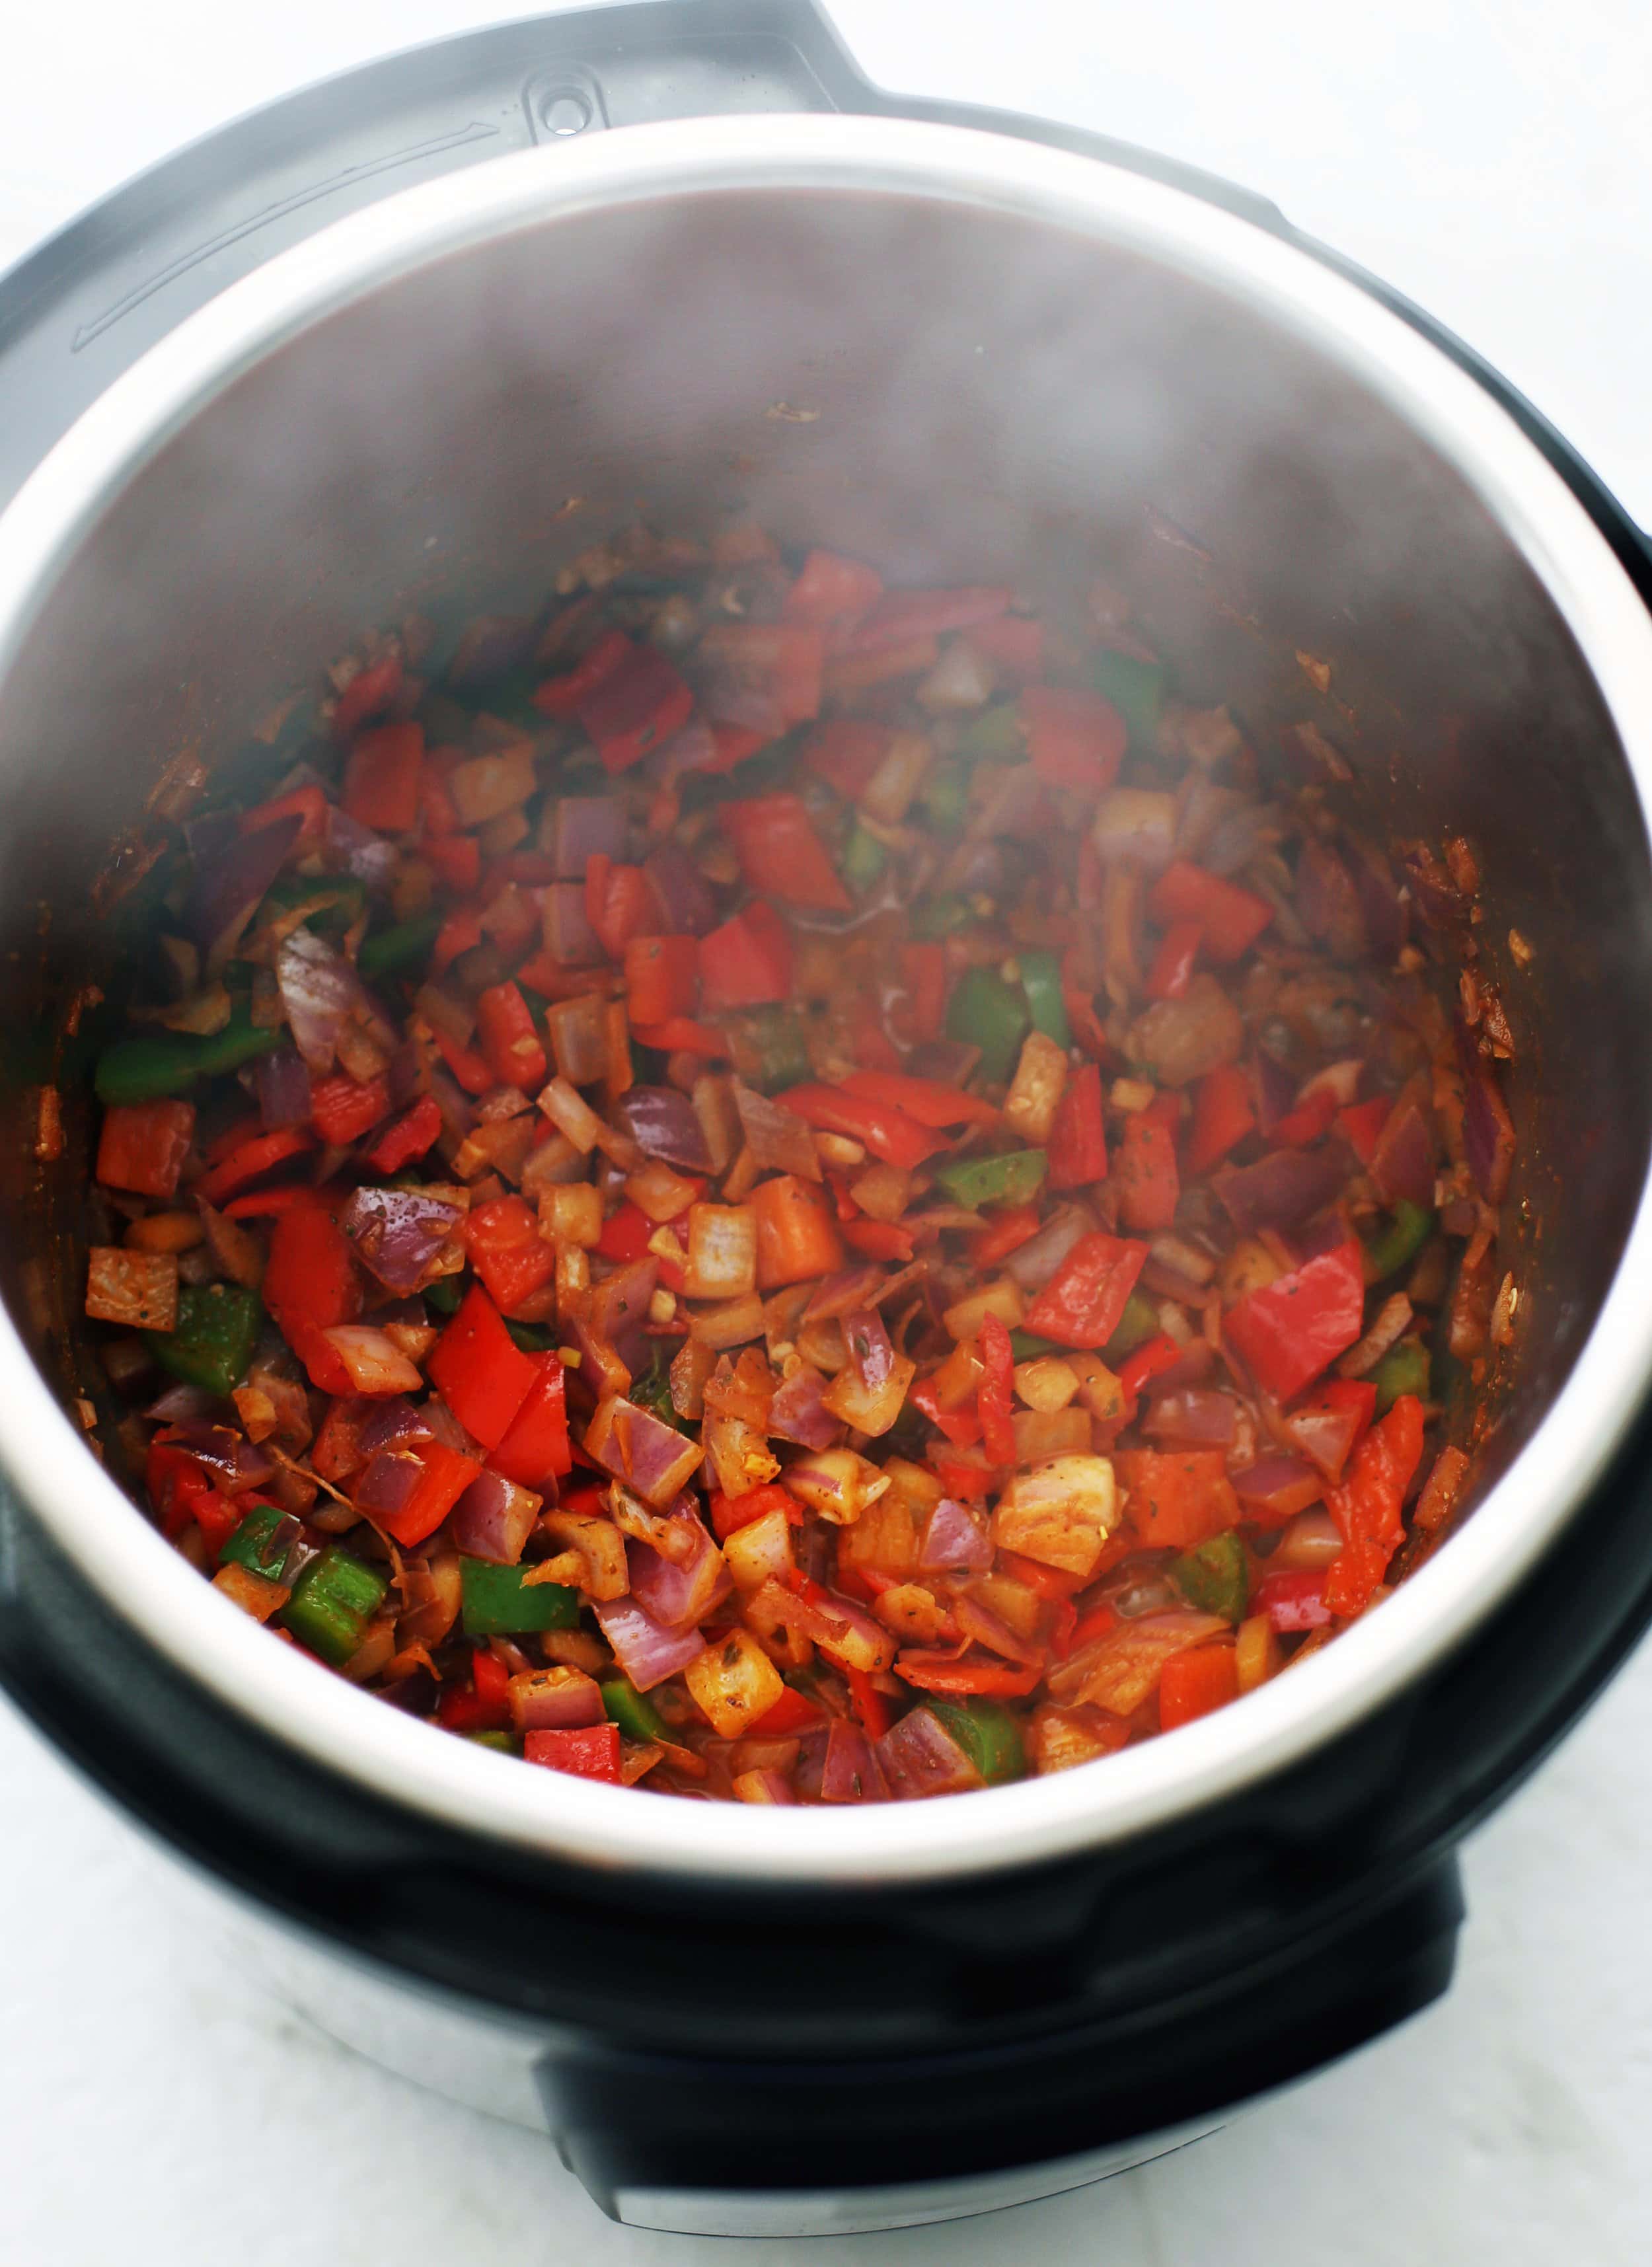 Sauteed and spiced chopped peppers, onions, and garlic in the Instant Pot.